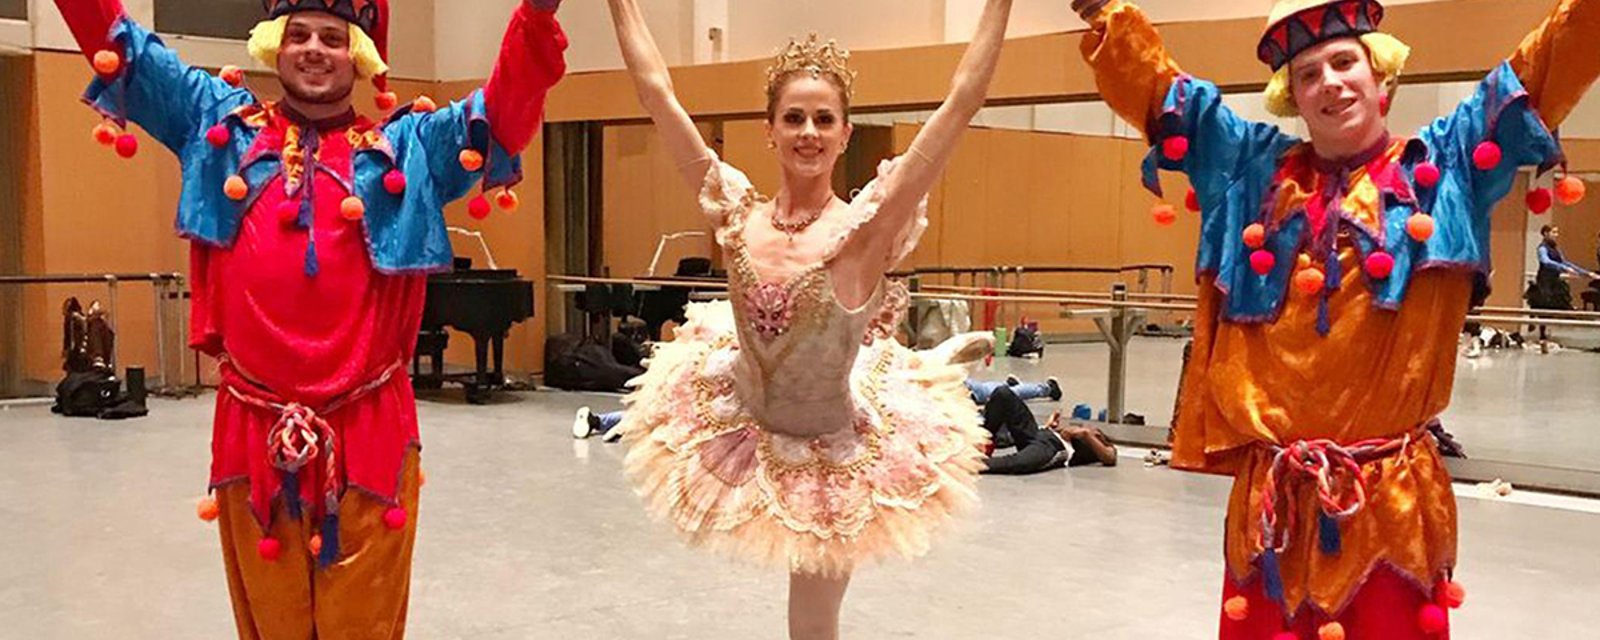 Matthews and Marner take the stage in The Nutcracker